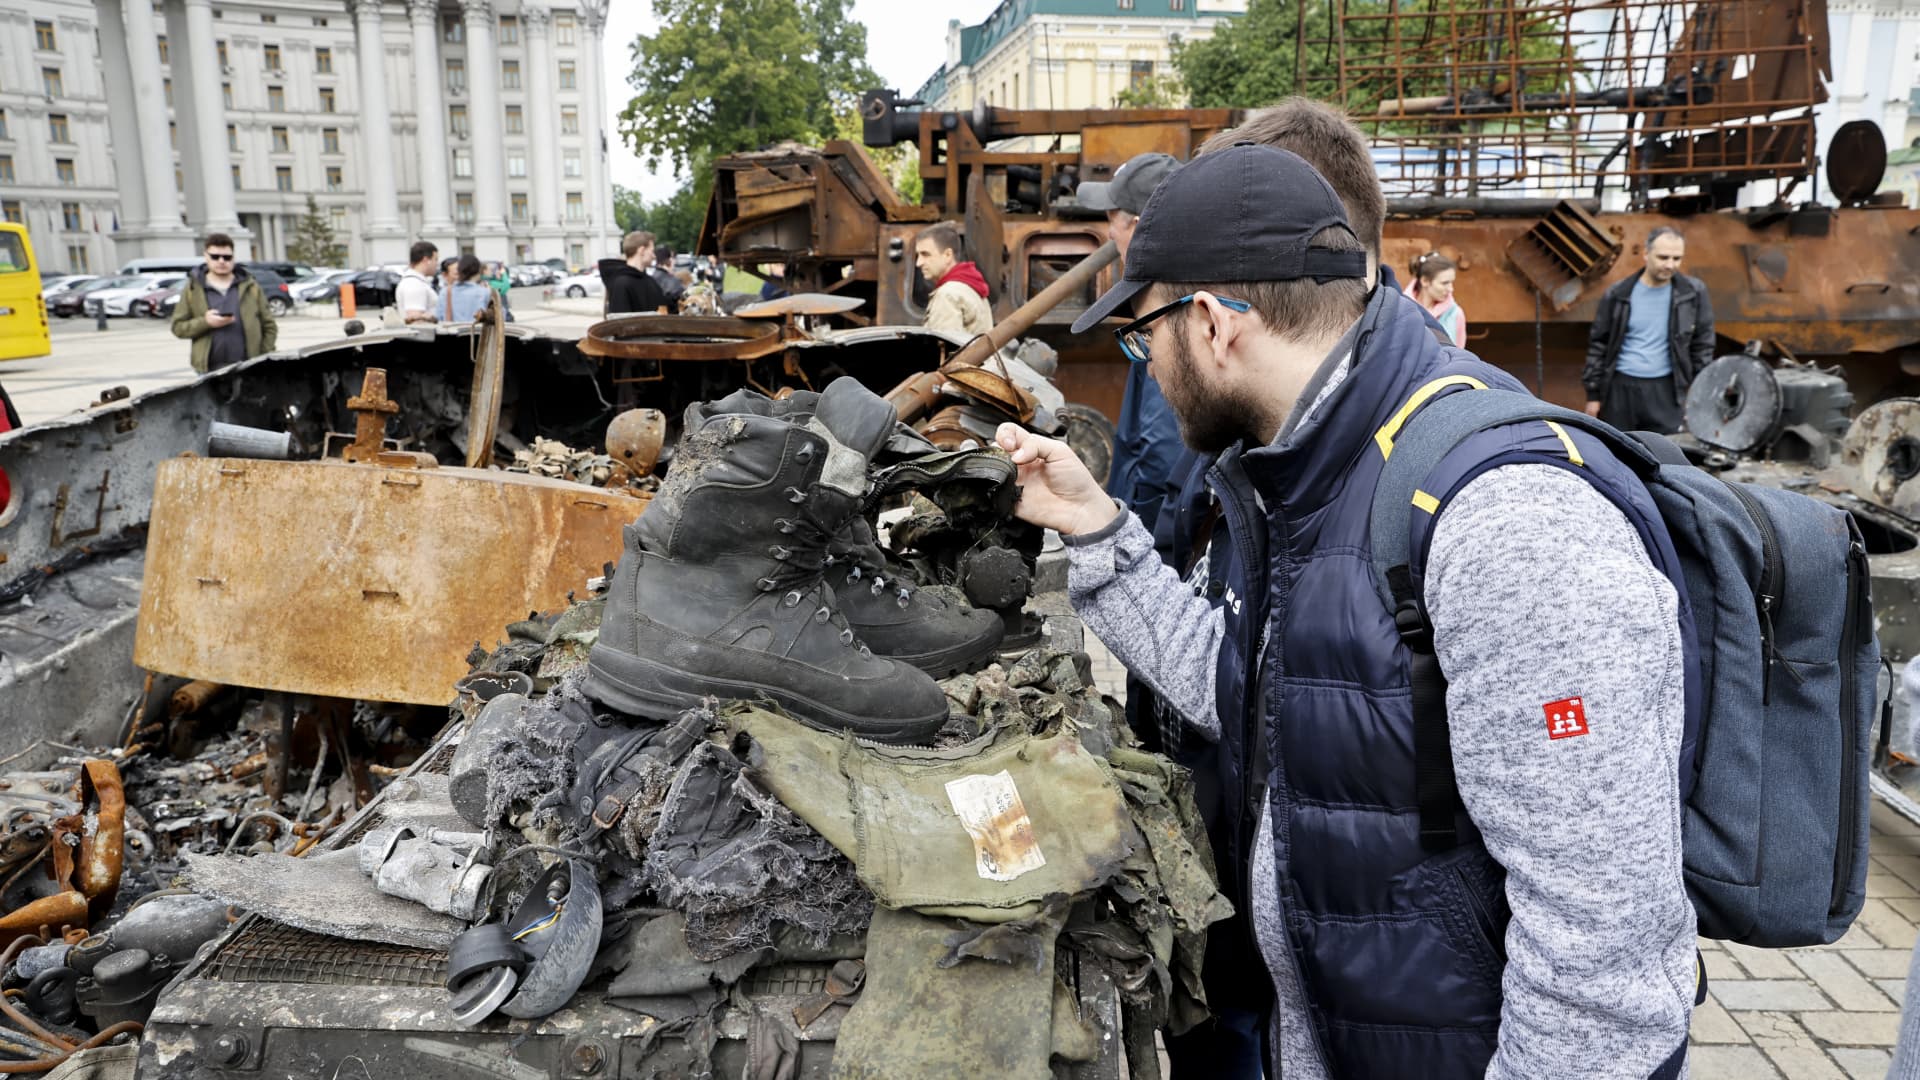 Destroyed Russian tanks and military equipment on display for public at Mykhailivska Square in Kyiv, Ukraine on May 23, 2022 as Russian-Ukrainian conflict continues. 